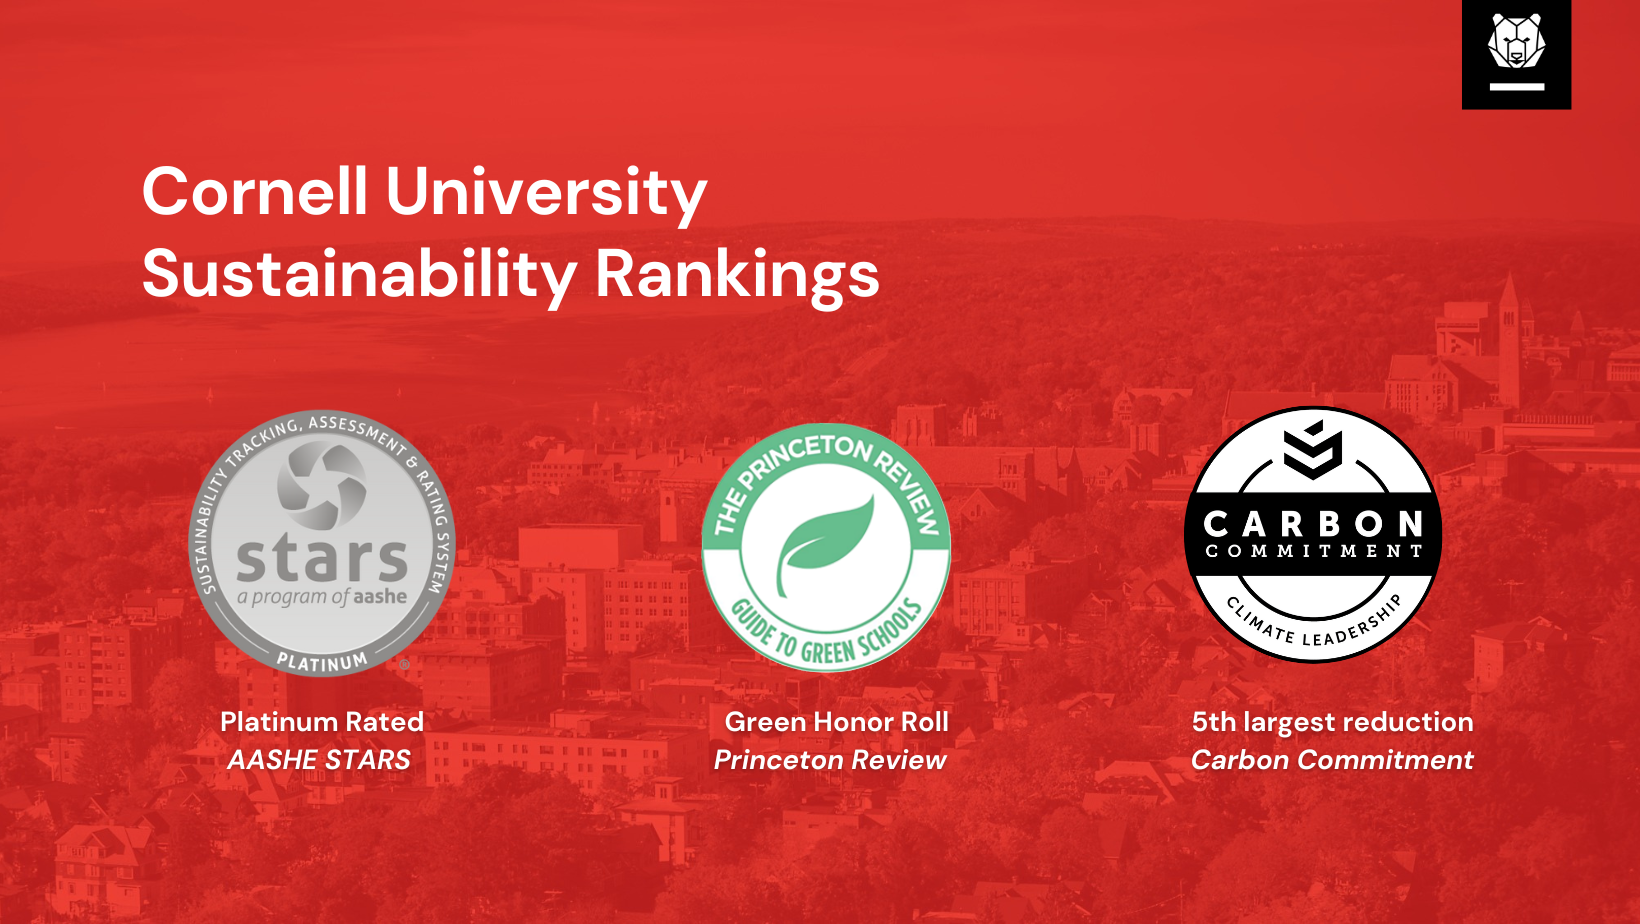 Cornell University 2021 sustainability rankings: Platinum rated AASHE STARS, #4 coolest school from Sierra Magazine, Green Honor Roll from Princeton Review, and 5th largest reduction from Carbon Commitment